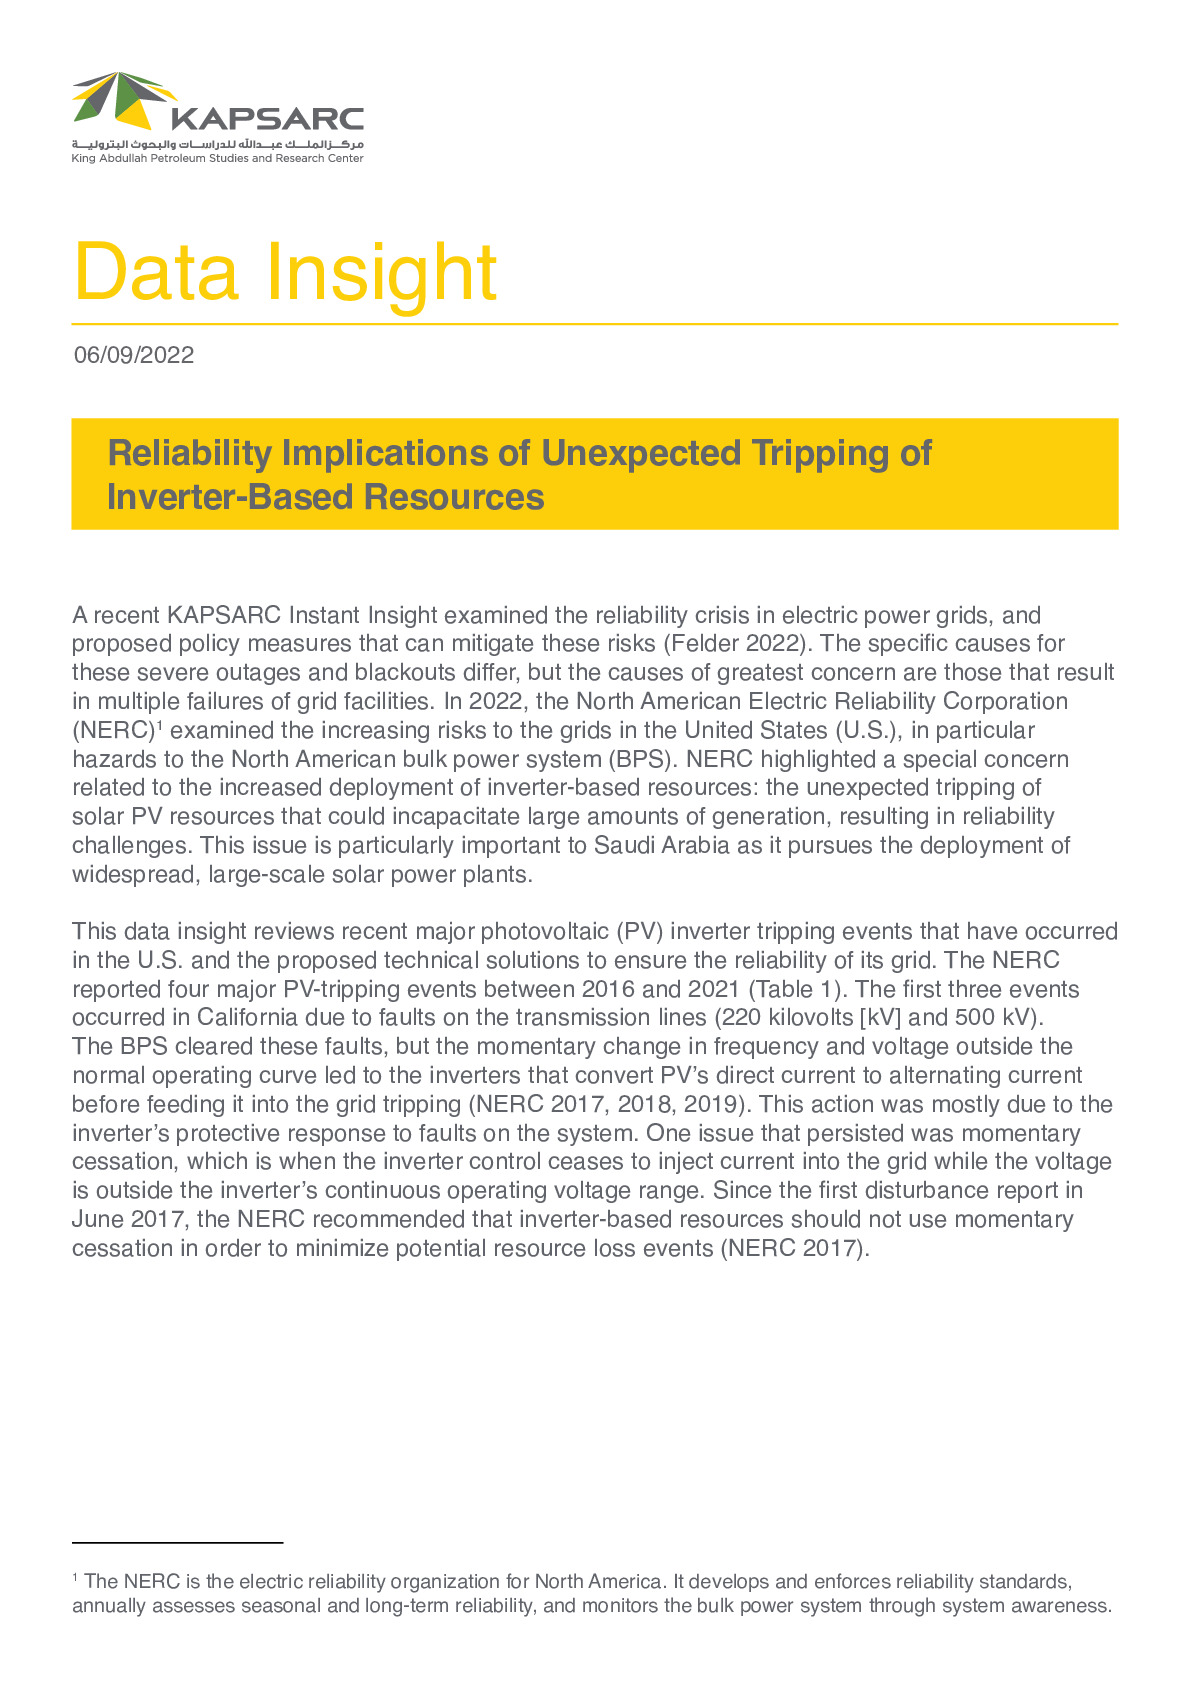 Reliability Implications of Unexpected Tripping of Inverter-Based Resources